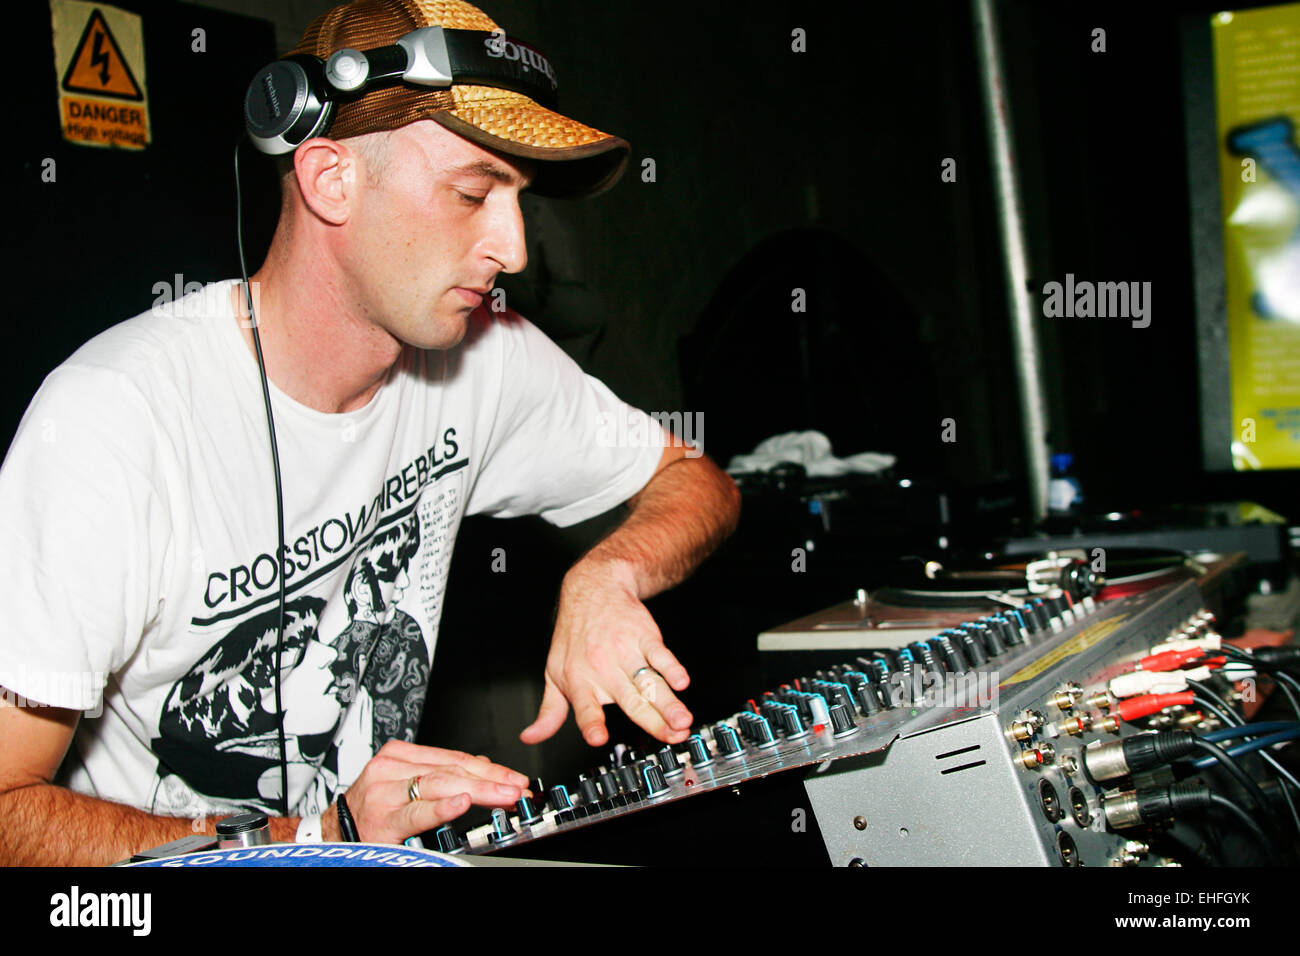 Damian Lazarus on the XFM stage at the TDK Cross Central Festival London. Stock Photo